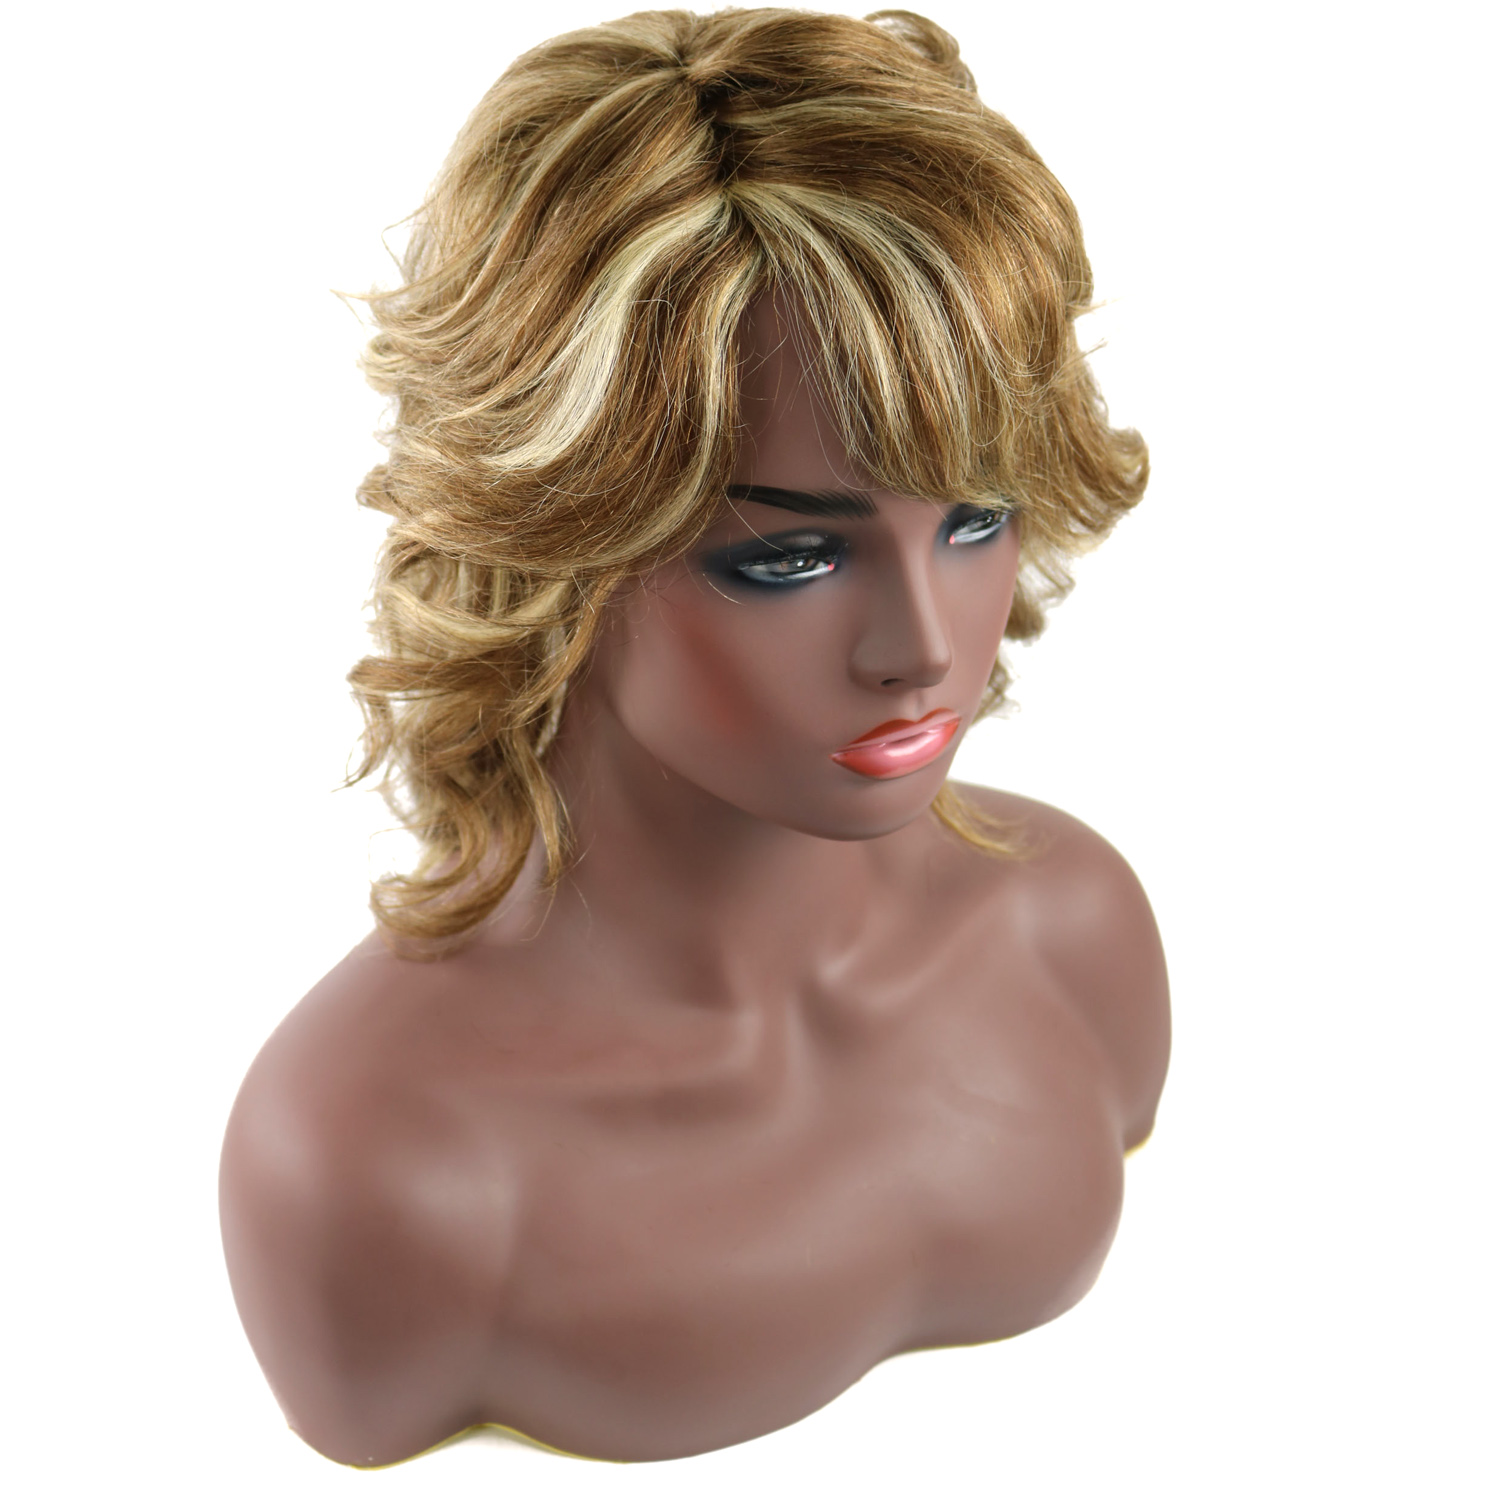 Long Layered Wavy Capless Wigs 100% Human Hair 14 Inches